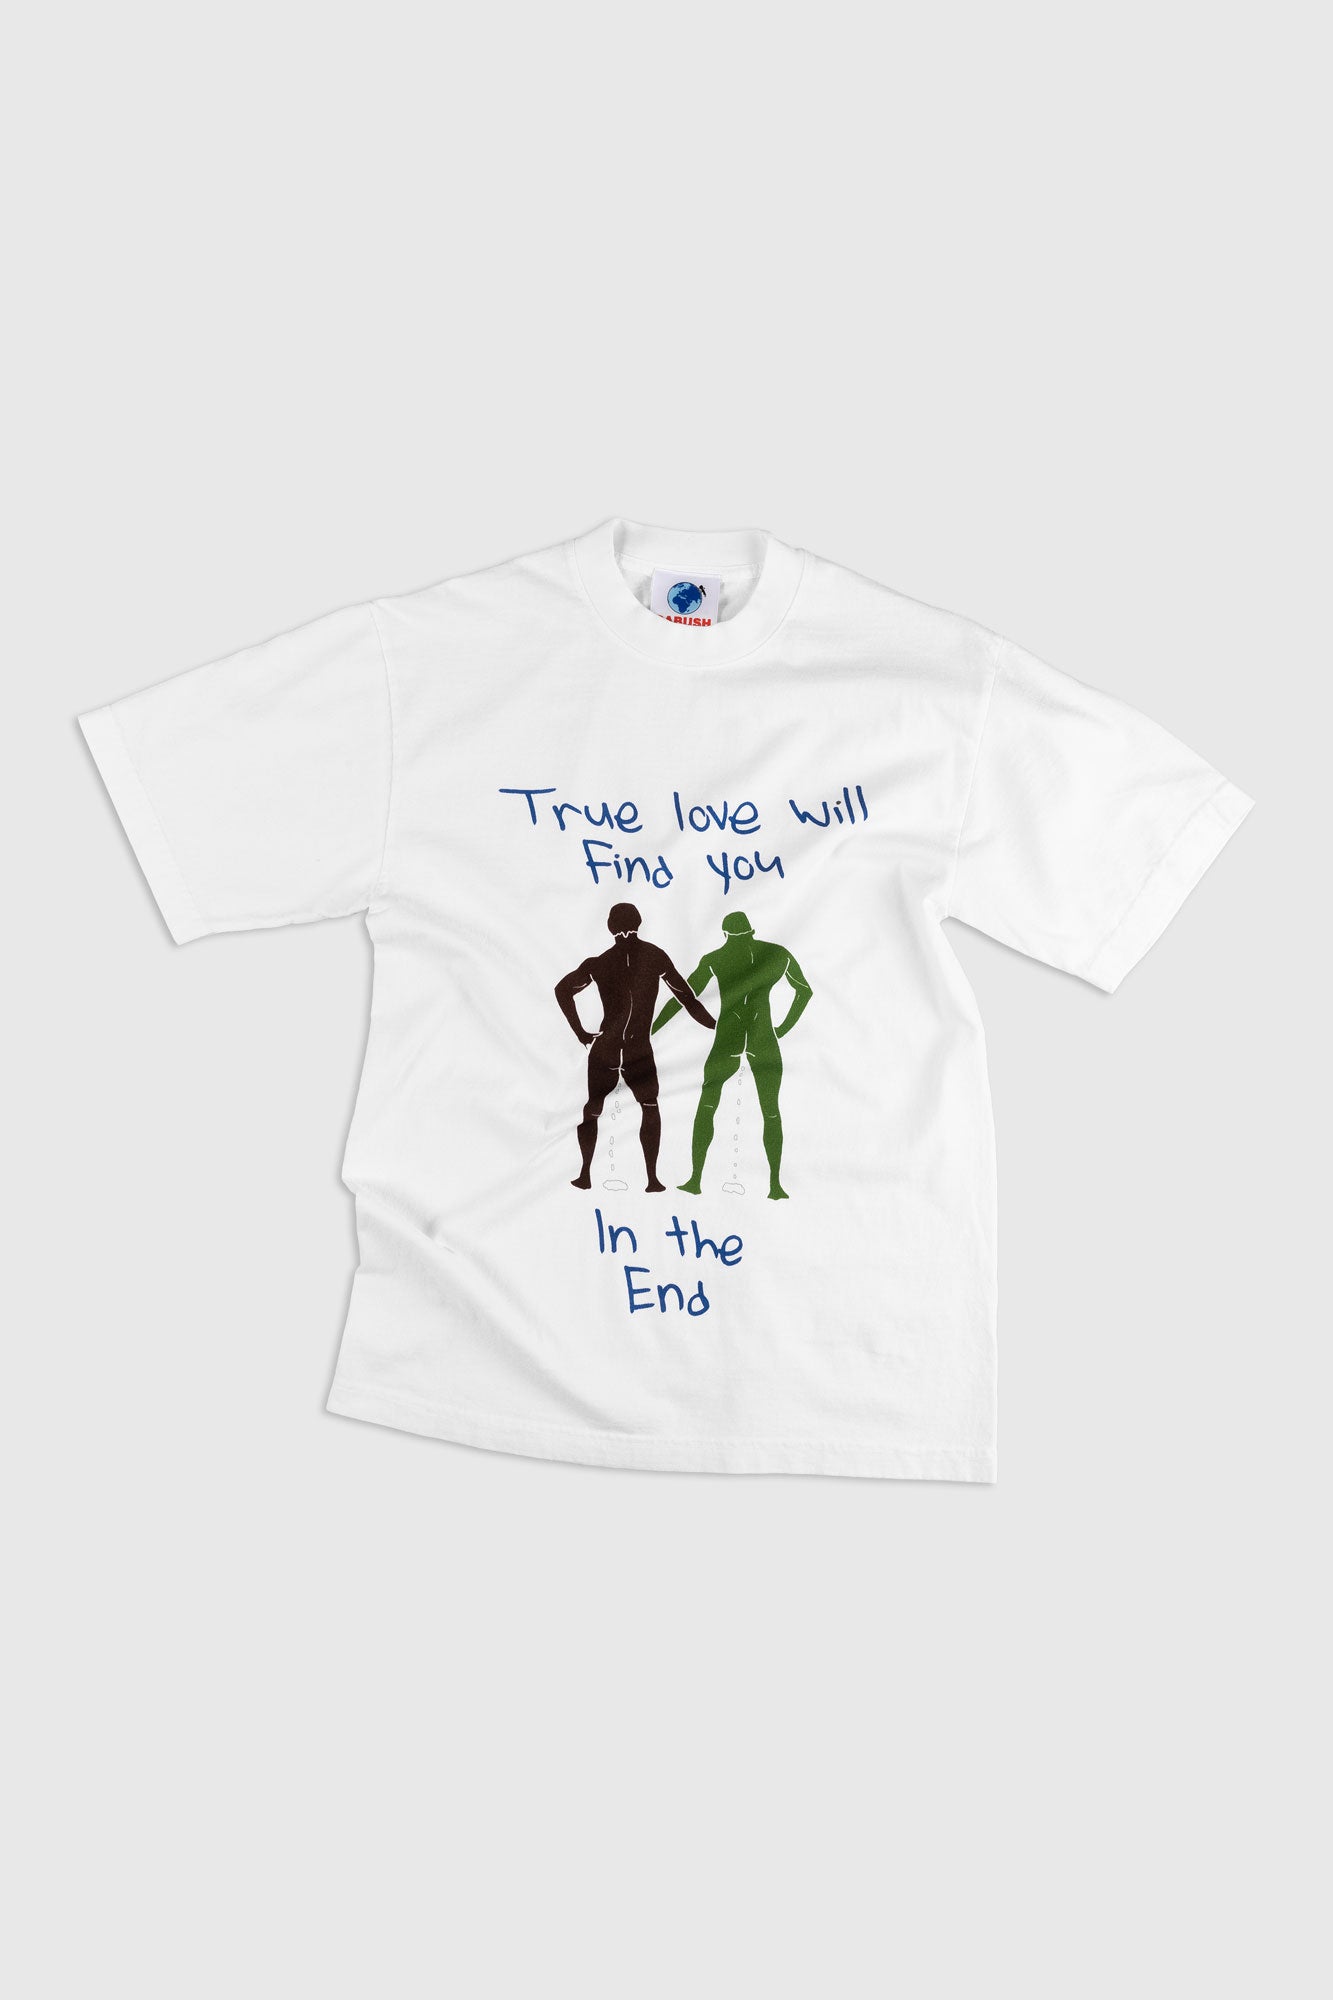 DABUSH TRUE LOVE WILL FIND YOU IN THE END T-SHIRT, DANIEL JOHNSTON. 100% Cotton, oversized tee with huge front print. Made in Tel aviv. Shop and view the latest Drops from the official DABUSH website. Worldwide Shipping. 